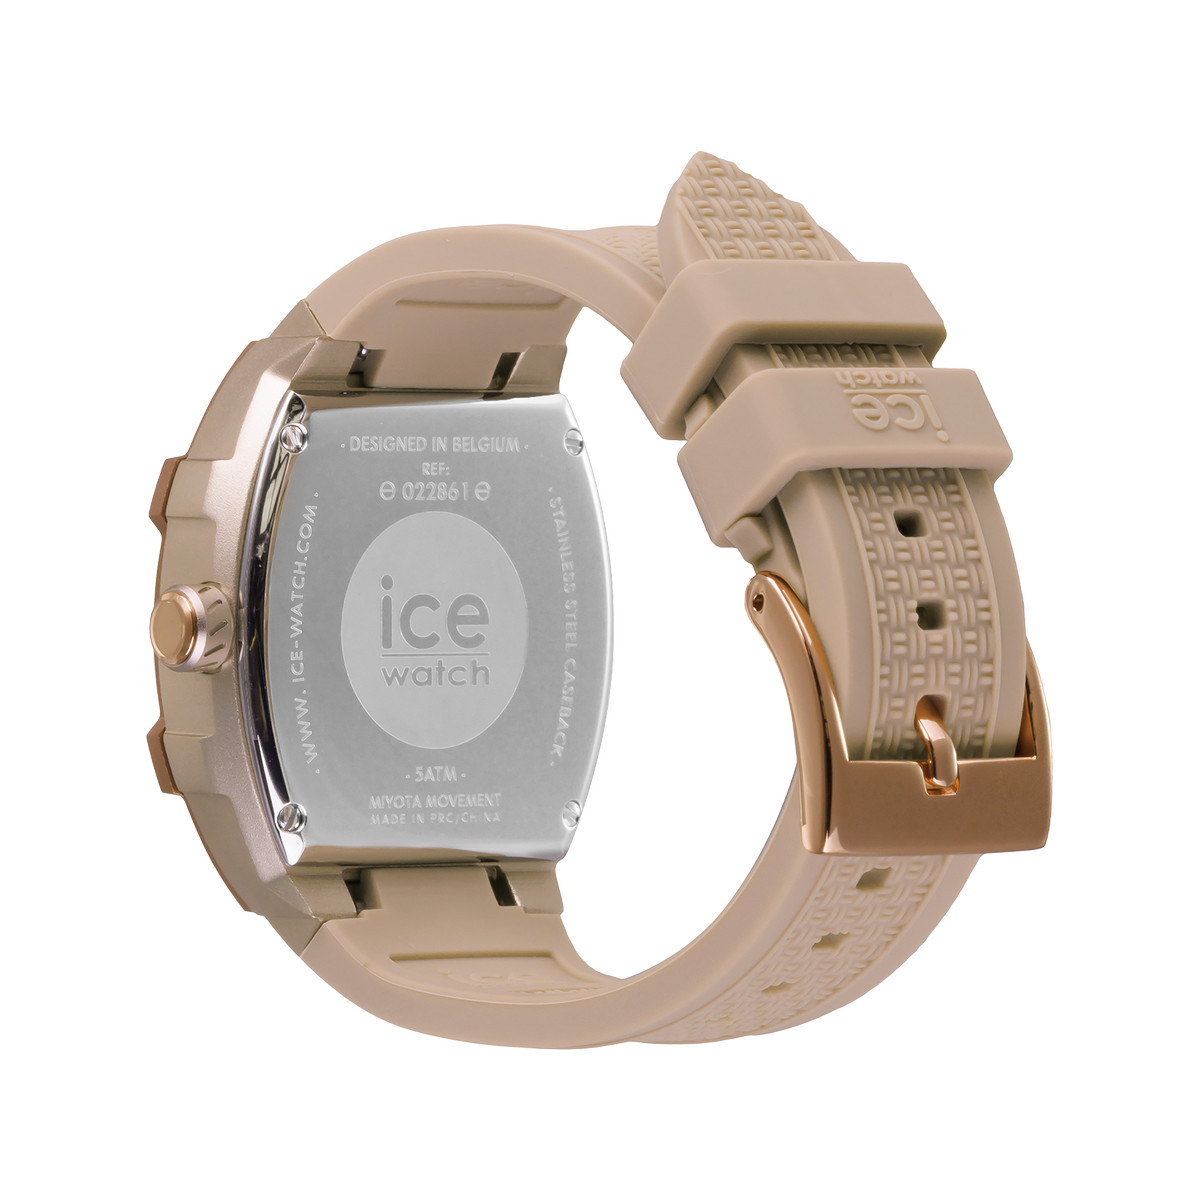 Montre ICE WATCH Ice boliday femme bracelet silicone marron - vue 3